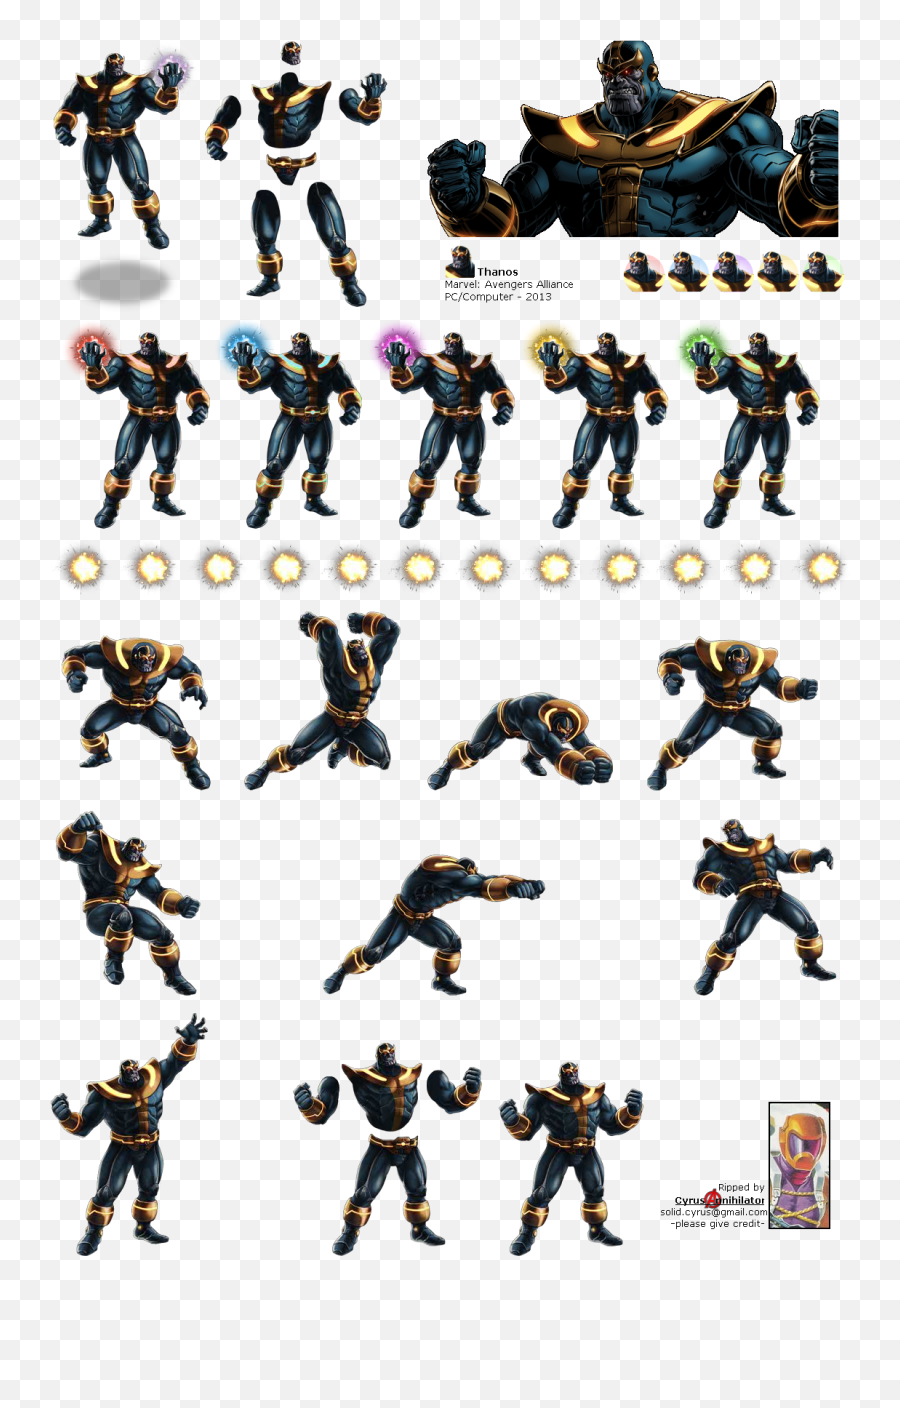 Download Click For Full Sized Image - Thanos Sprite Sheet Png,Thanos Png